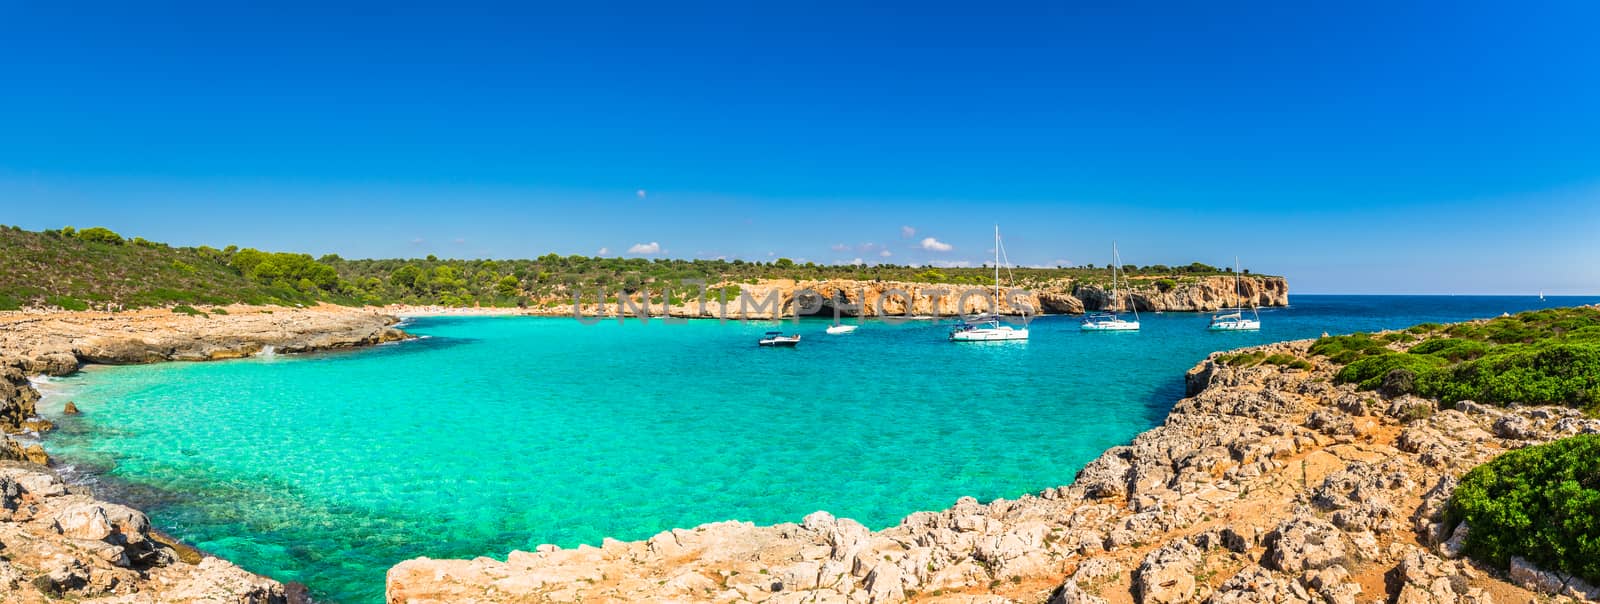 Panorama view of Cala Varques, picturesque bay beach on Mallorca island, Spain Balearic Islands